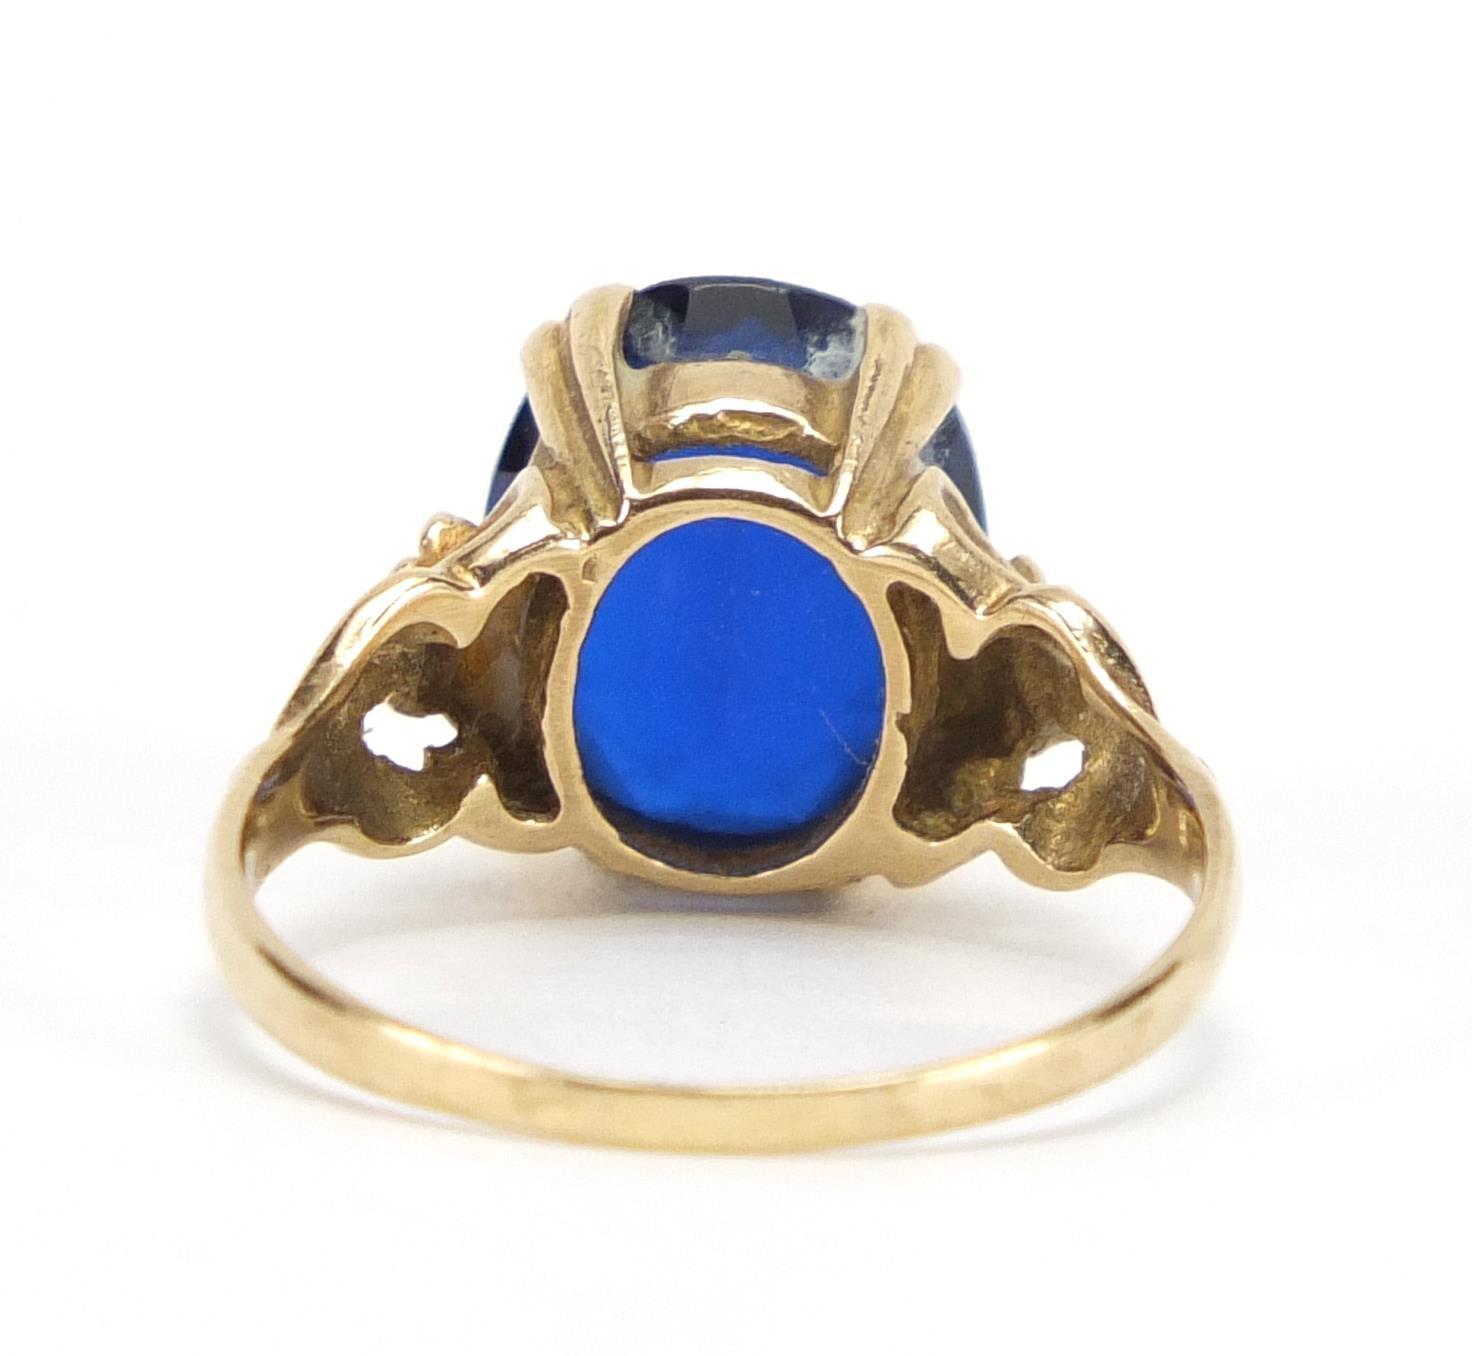 9ct gold blue stone solitaire ring, size O, approximate weight 3.6g : For Extra Condition Reports - Image 4 of 6